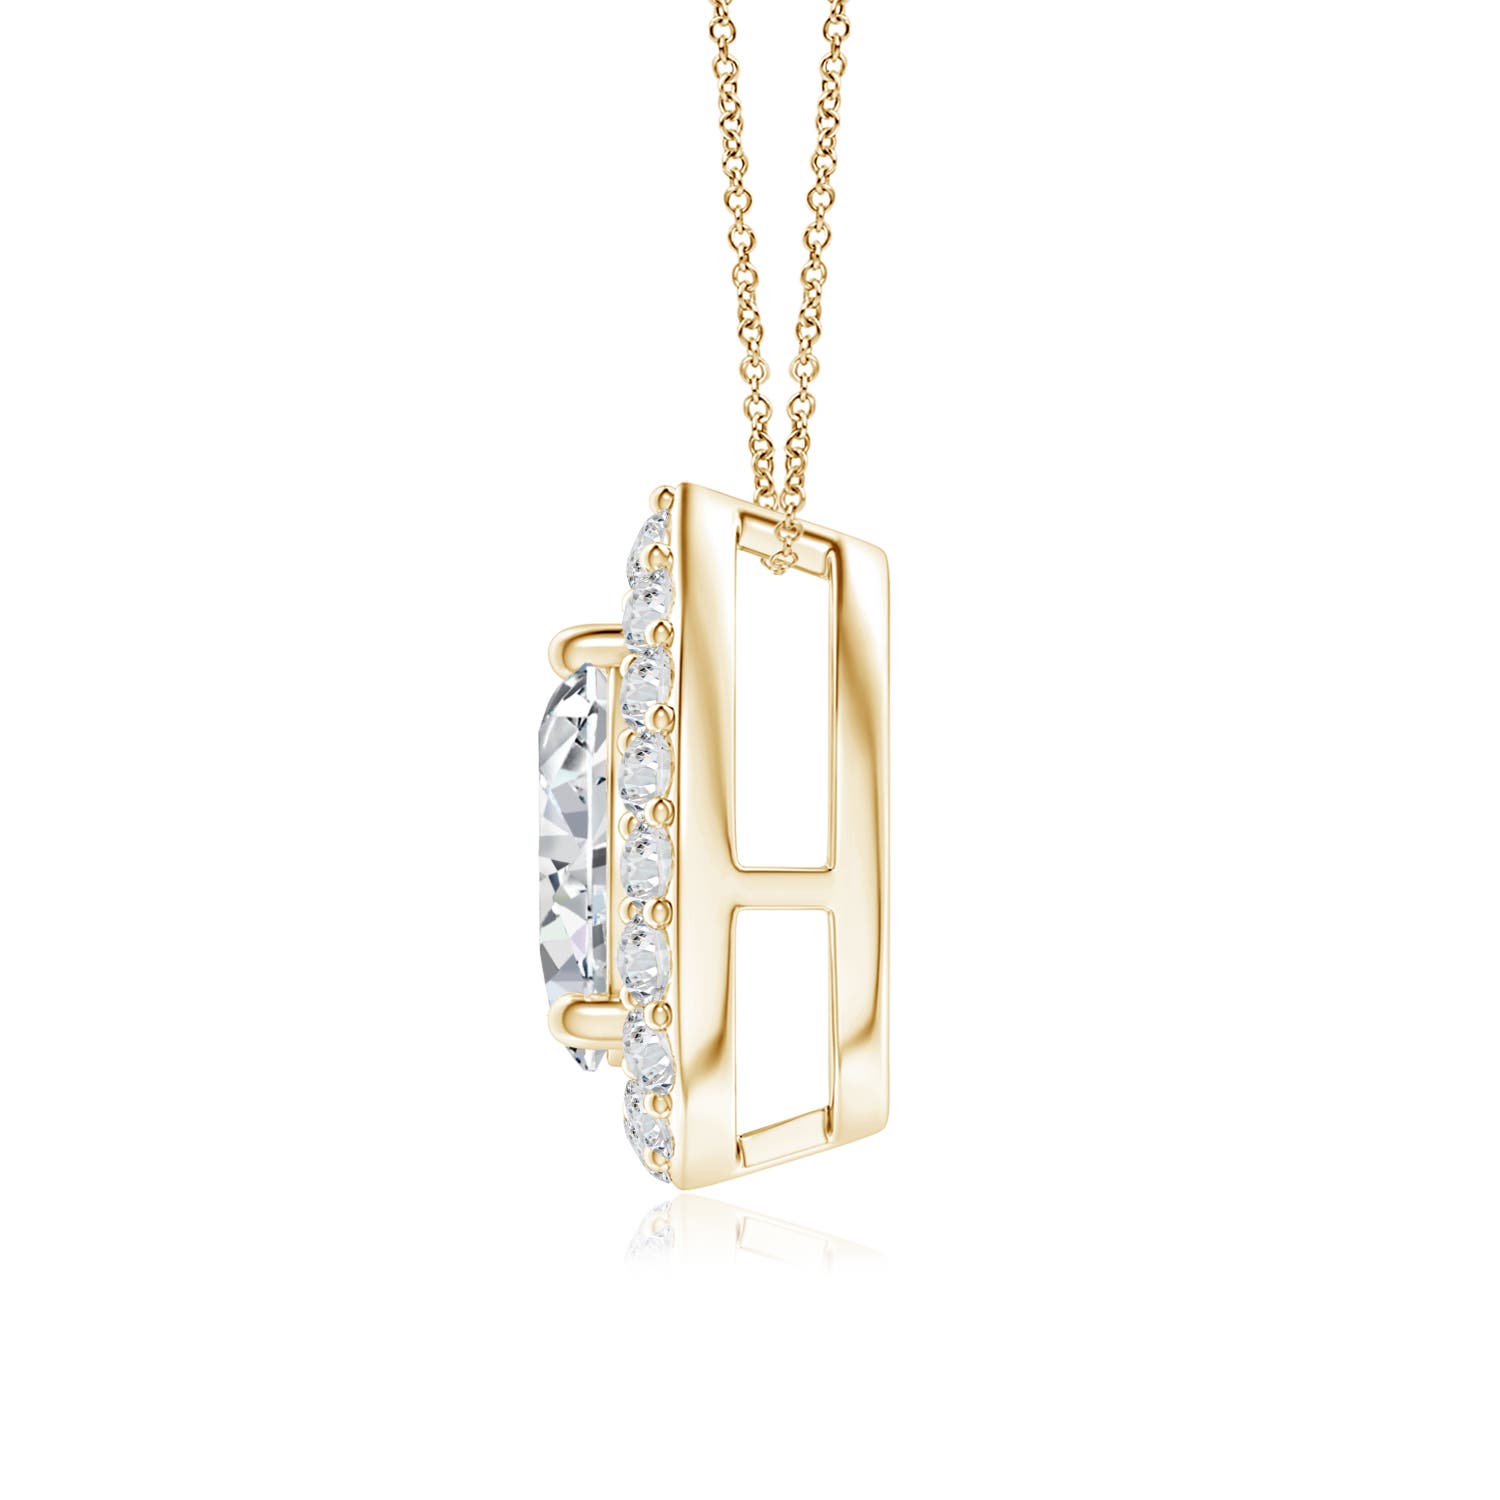 H, SI2 / 0.3 CT / 14 KT Yellow Gold